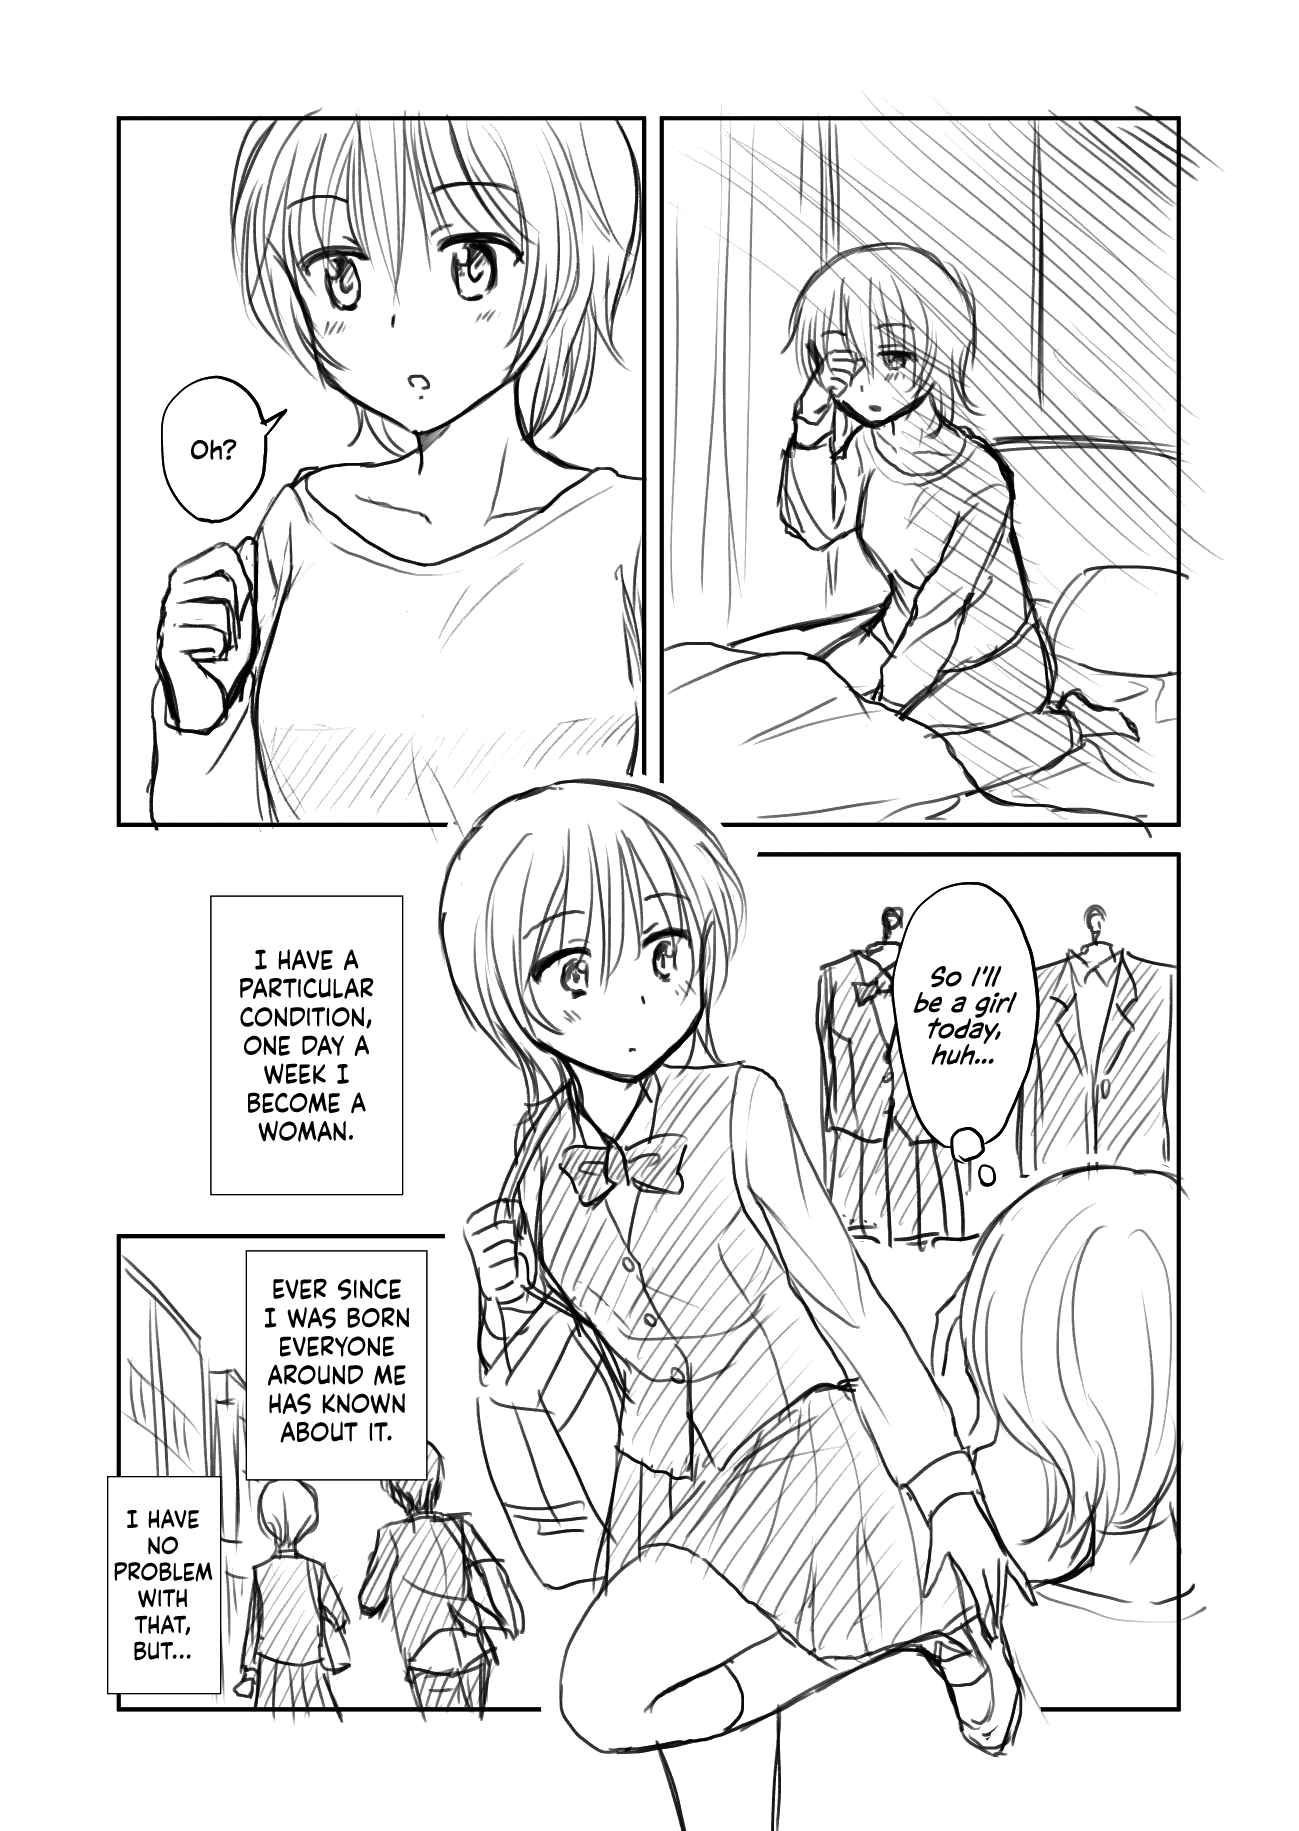 Mousou Fragments Ch. 1 This Morning When I Woke Up, I Had Become a Girl... Is a Theme Used Very Often.